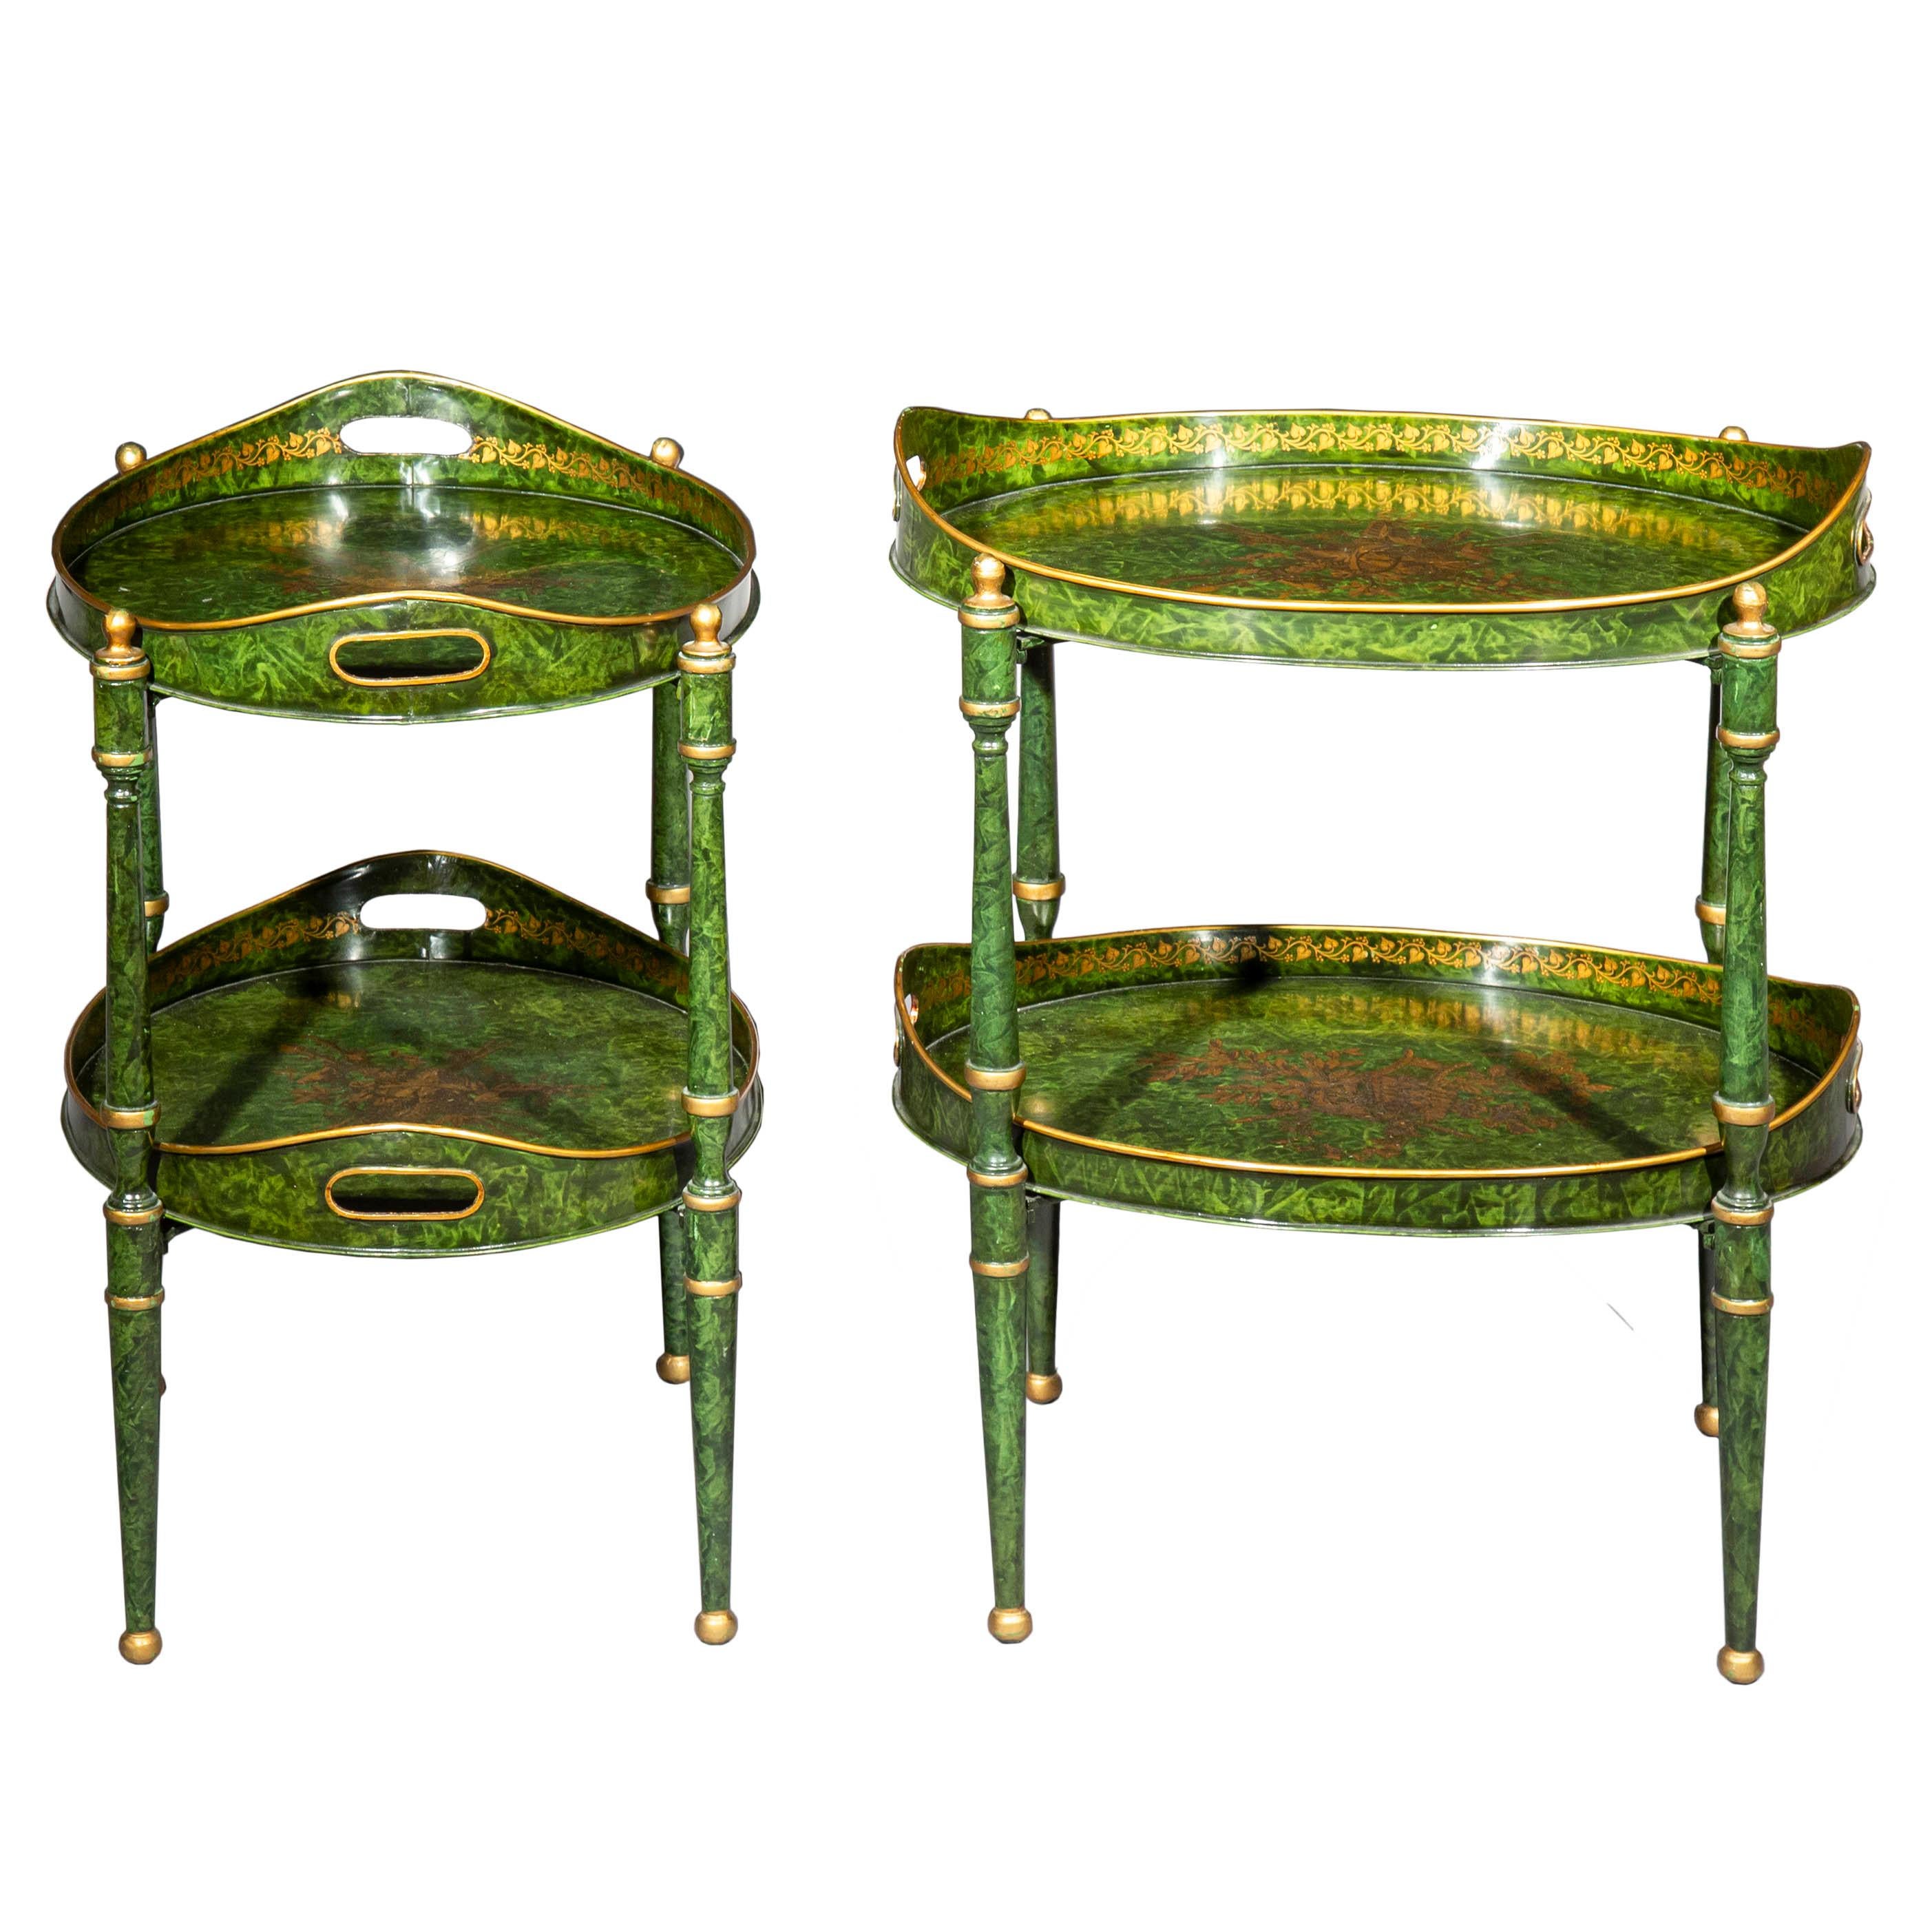 Painted Pair of Toleware Side Tables or Étagères